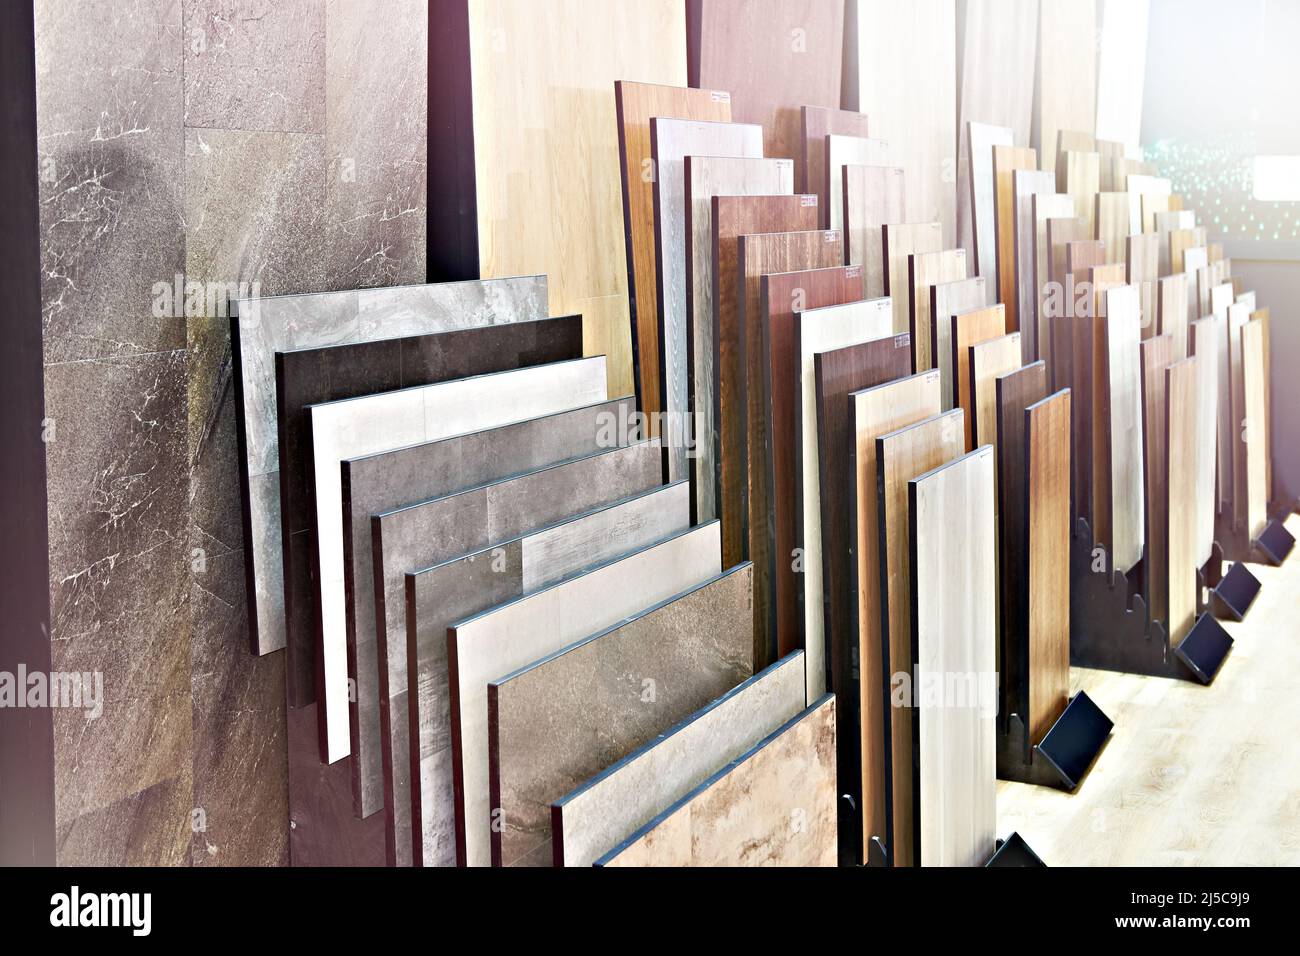 Decorative wooden panels on the floor and walls in the store Stock Photo